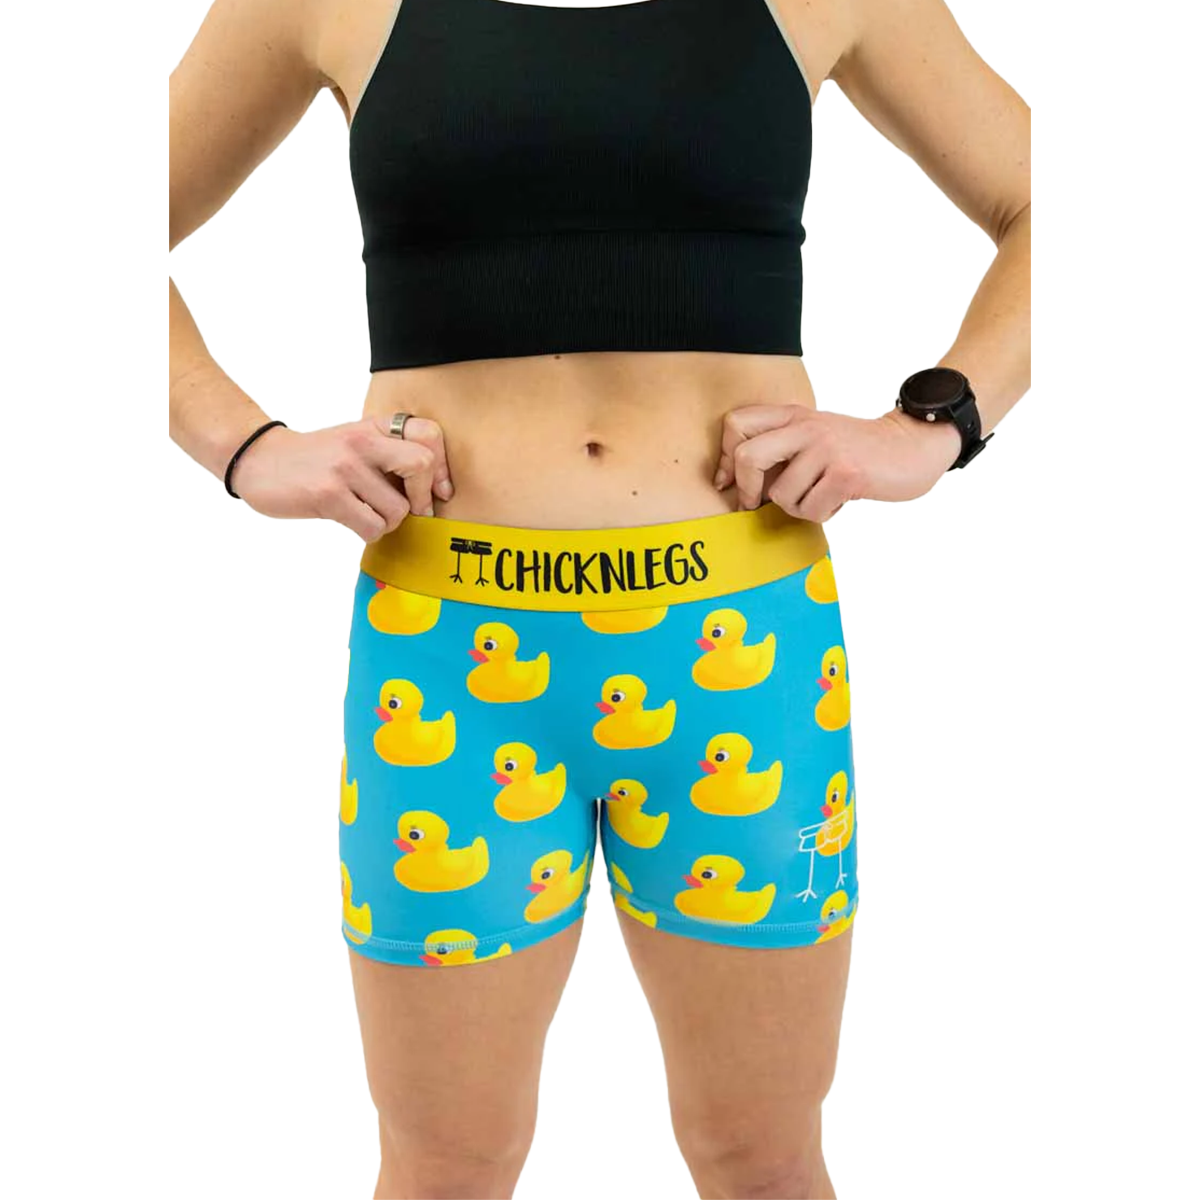 https://www.fit2run.com/on/demandware.static/-/Sites-fit2run-master-catalog/en_US/dw77fba8fb/large/Chickn%20Legs/compression%20shorts/rubber%20ducky/w3800CHICKNLEGS_rubber%20ducky_1.png